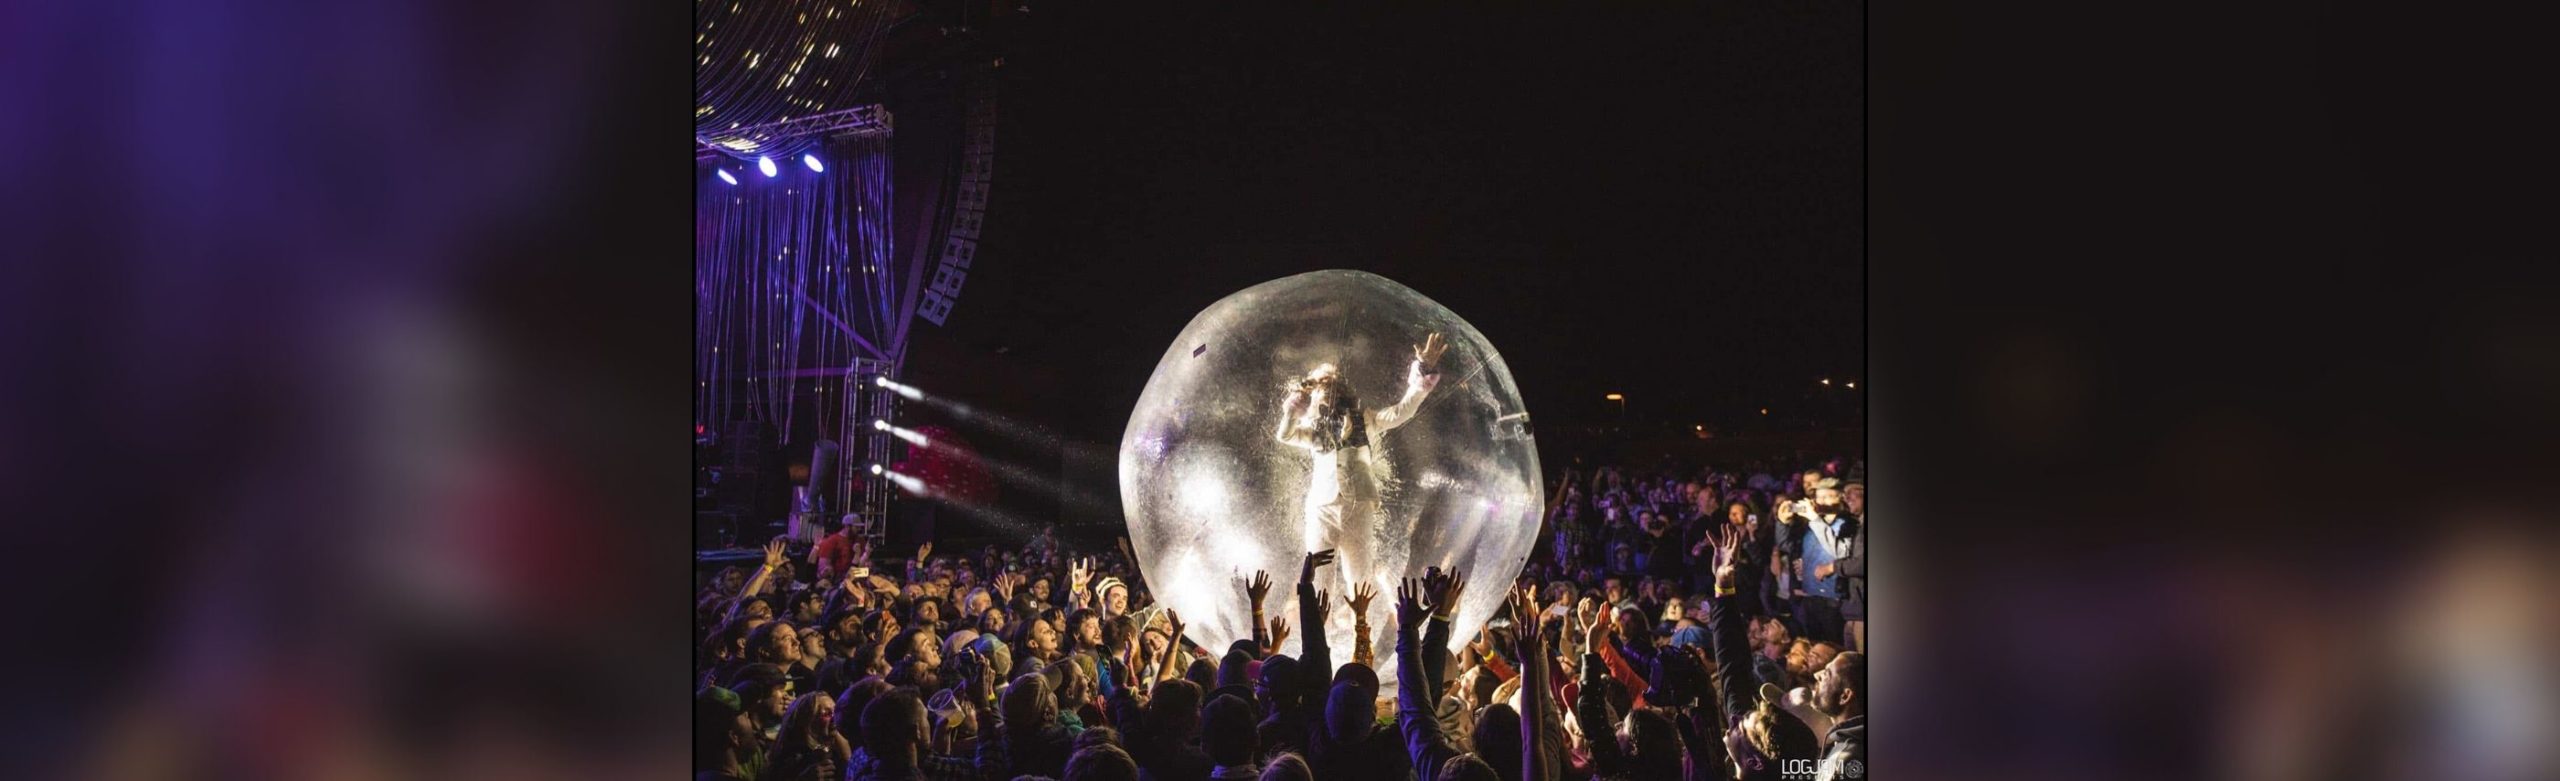 The Flaming Lips Confirm Rare Concert at the Wilma Image